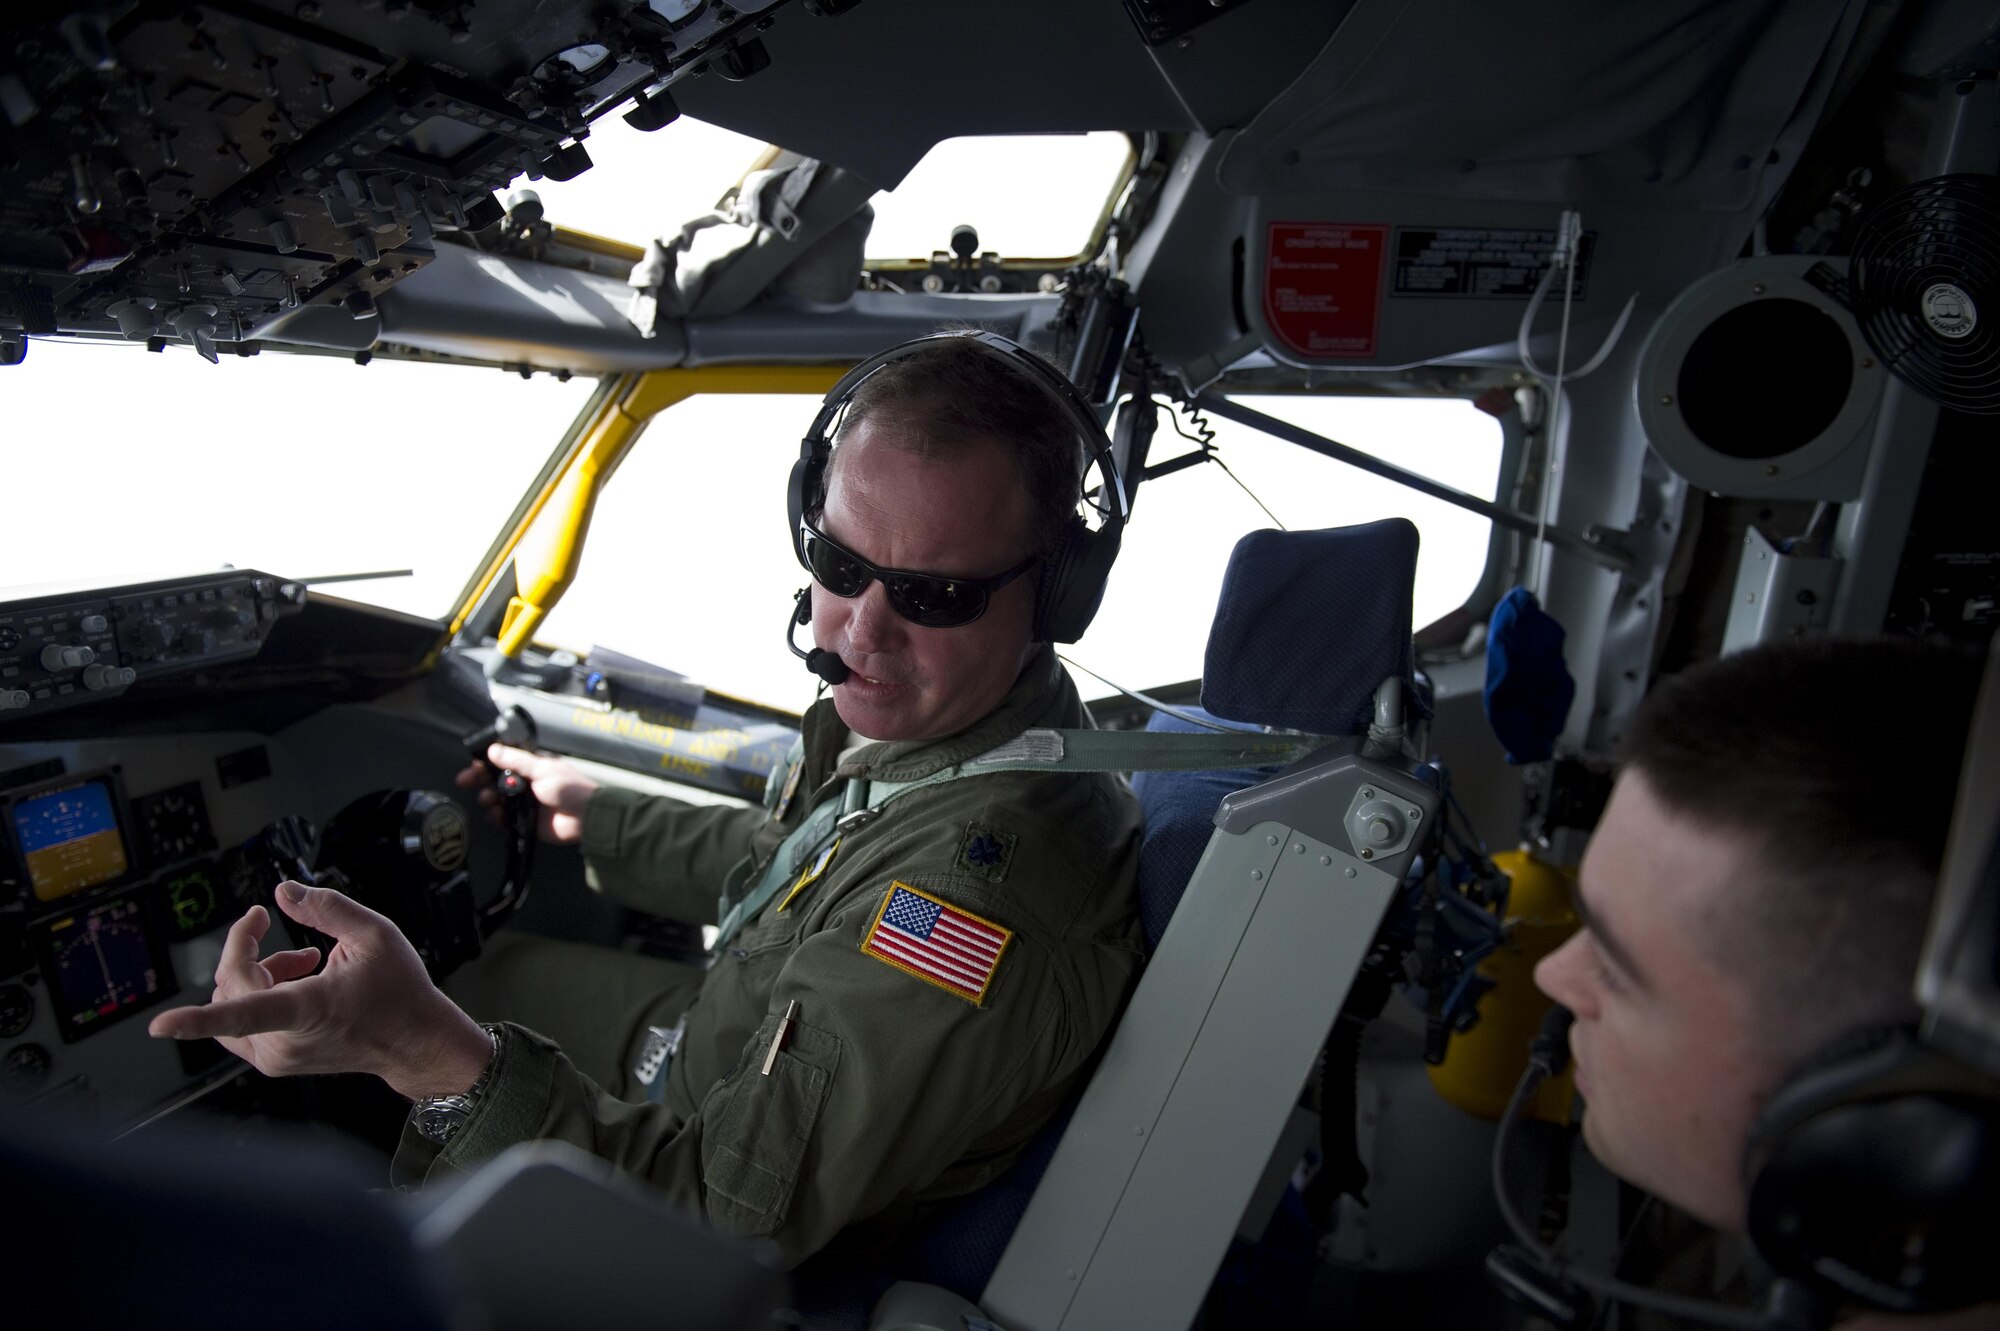 Lt. Col. Joe Austin, 434th Operations Support Squadron KC-135R Stratotanker pilot, explains the pilot’s role during aerial refueling to John Dean, University of Notre Dame Air Force ROTC Detachment 225 cadet, during a refueling mission over Indiana April 1, 2015. During the orientation flight that departed from Grissom Air Reserve Base, Ind., 20 cadets and 6 midshipmen observed the refueling of a C-17 Globemaster III and an A-10 Thunderbolt II. (U.S. Air Force photo/Tech. Sgt. Benjamin Mota)